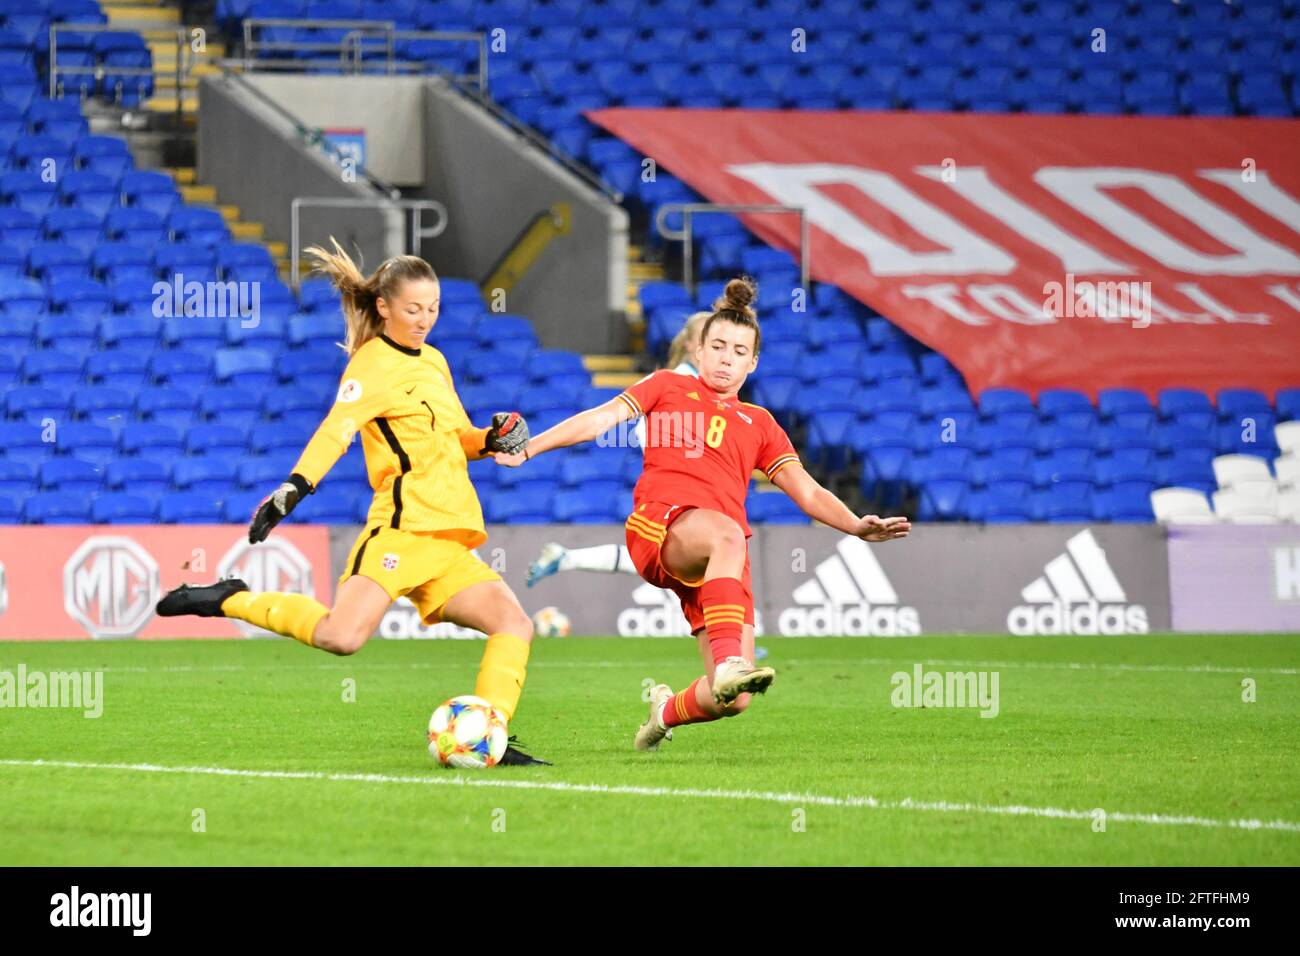 Cardiff, Wales. 27 October, 2020. Goalkeeper Cecilie Fiskerstrand of Norway Women under pressure from Angharad James of Wales Women during the UEFA Women's European Championship 2020 Qualifying Group C match between Wales Women and Norway Women at the Cardiff City Stadium in Cardiff, Wales, UK on 27, October 2020. Credit: Duncan Thomas/Majestic Media. Stock Photo